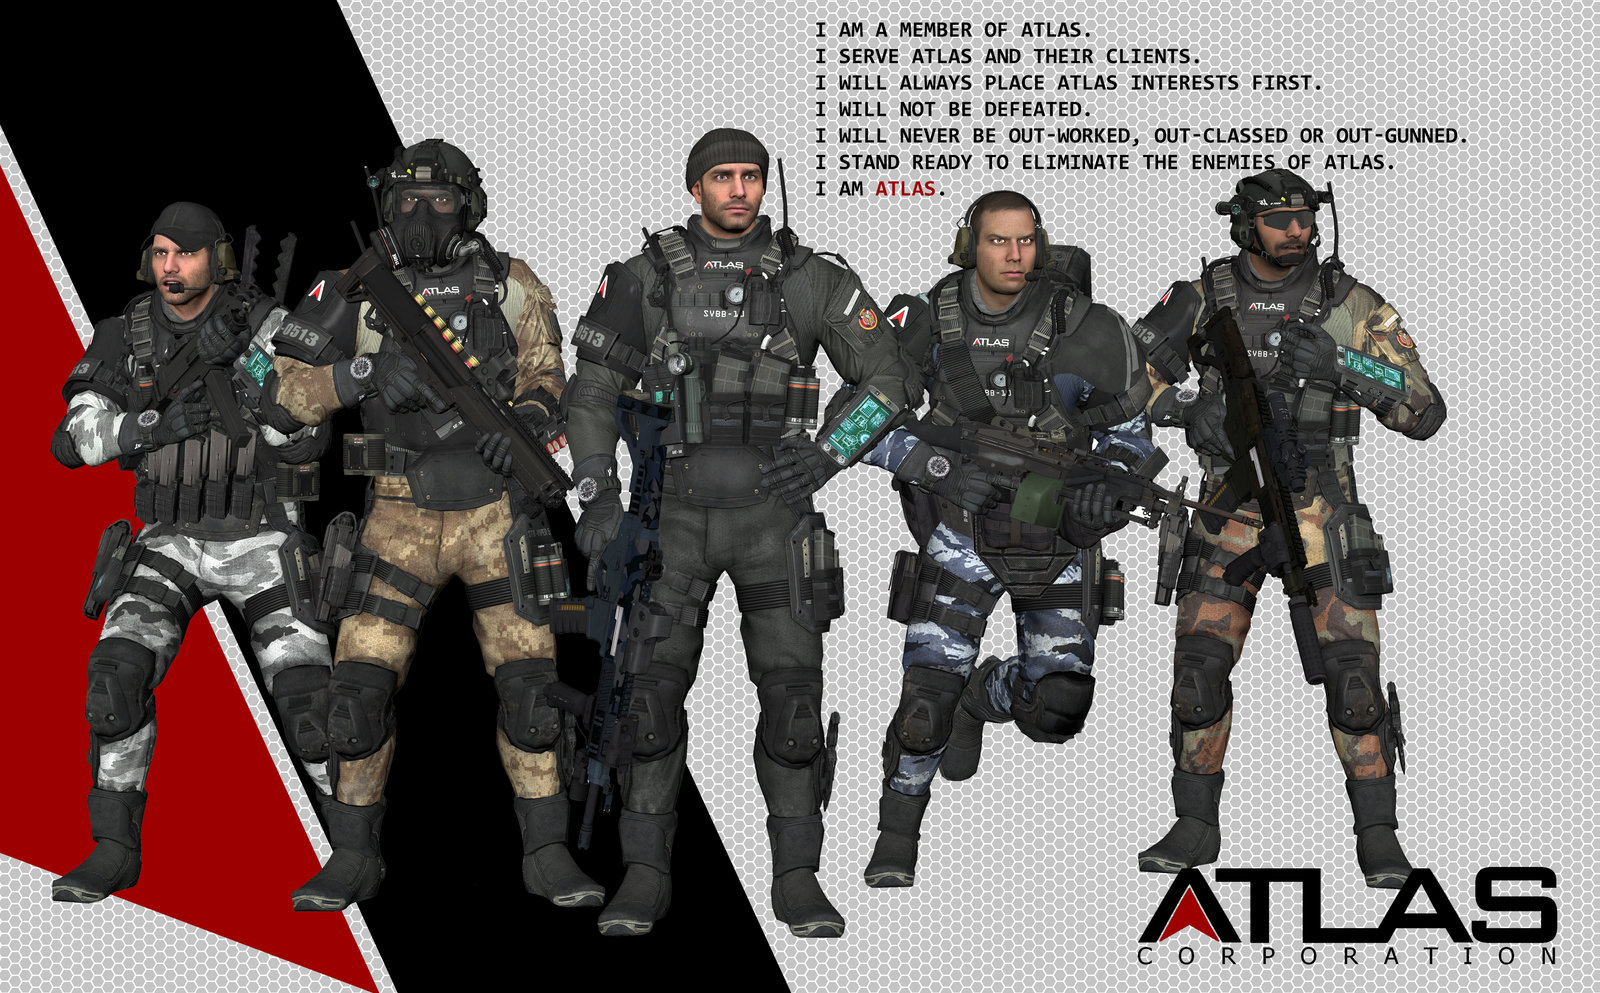 Welcome to Atlas by Kommandant4298 on